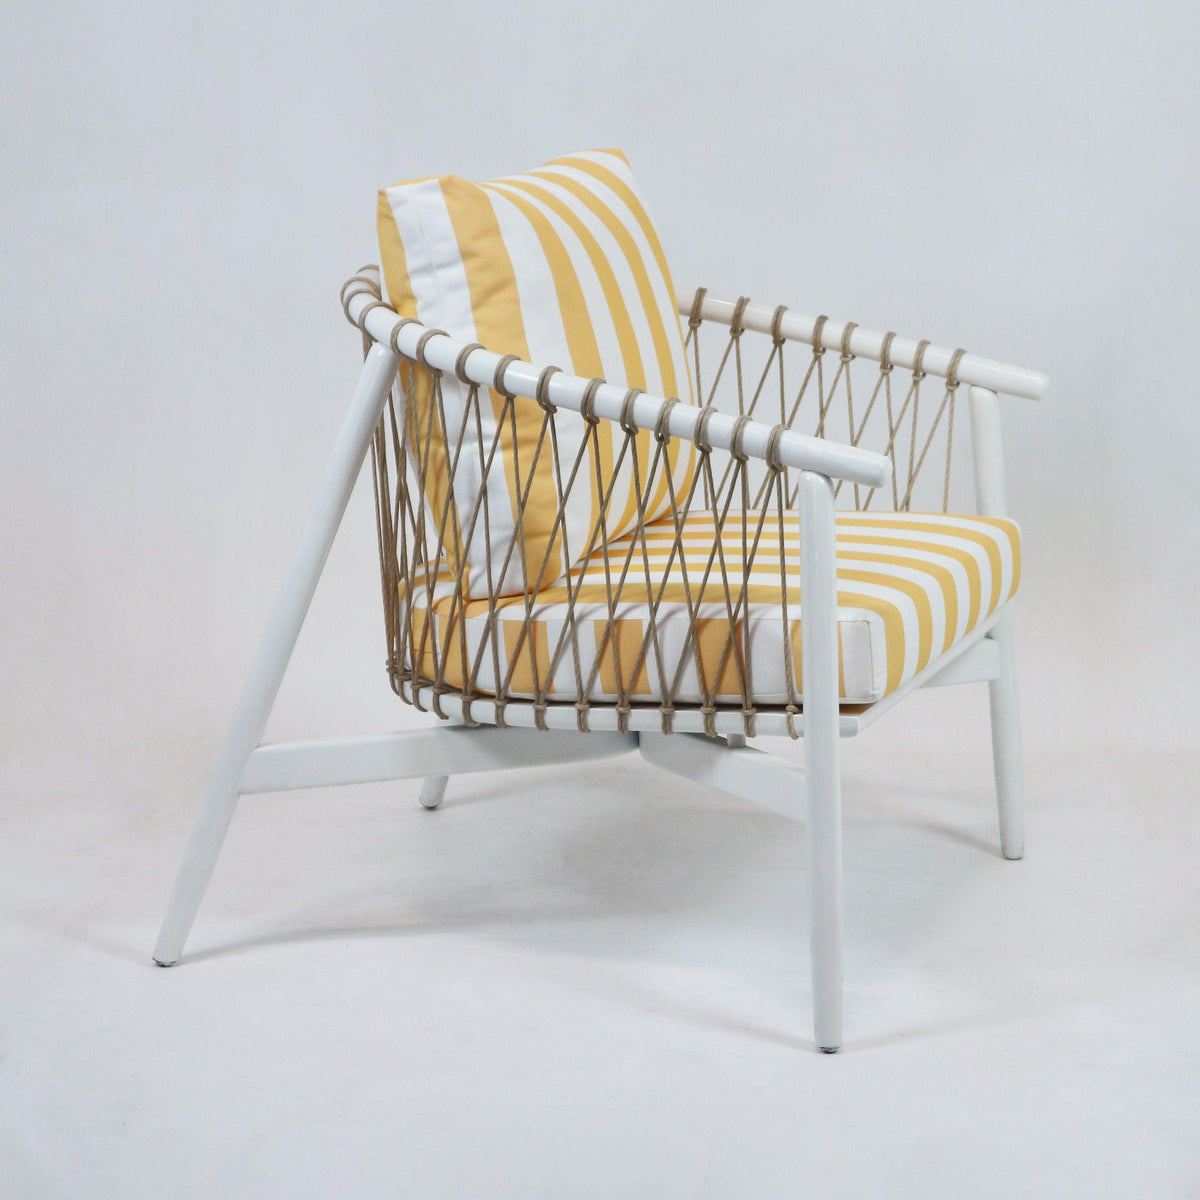 Mevcali Accent Chair with Summer Stripe Upholstery - INTERIORTONIC